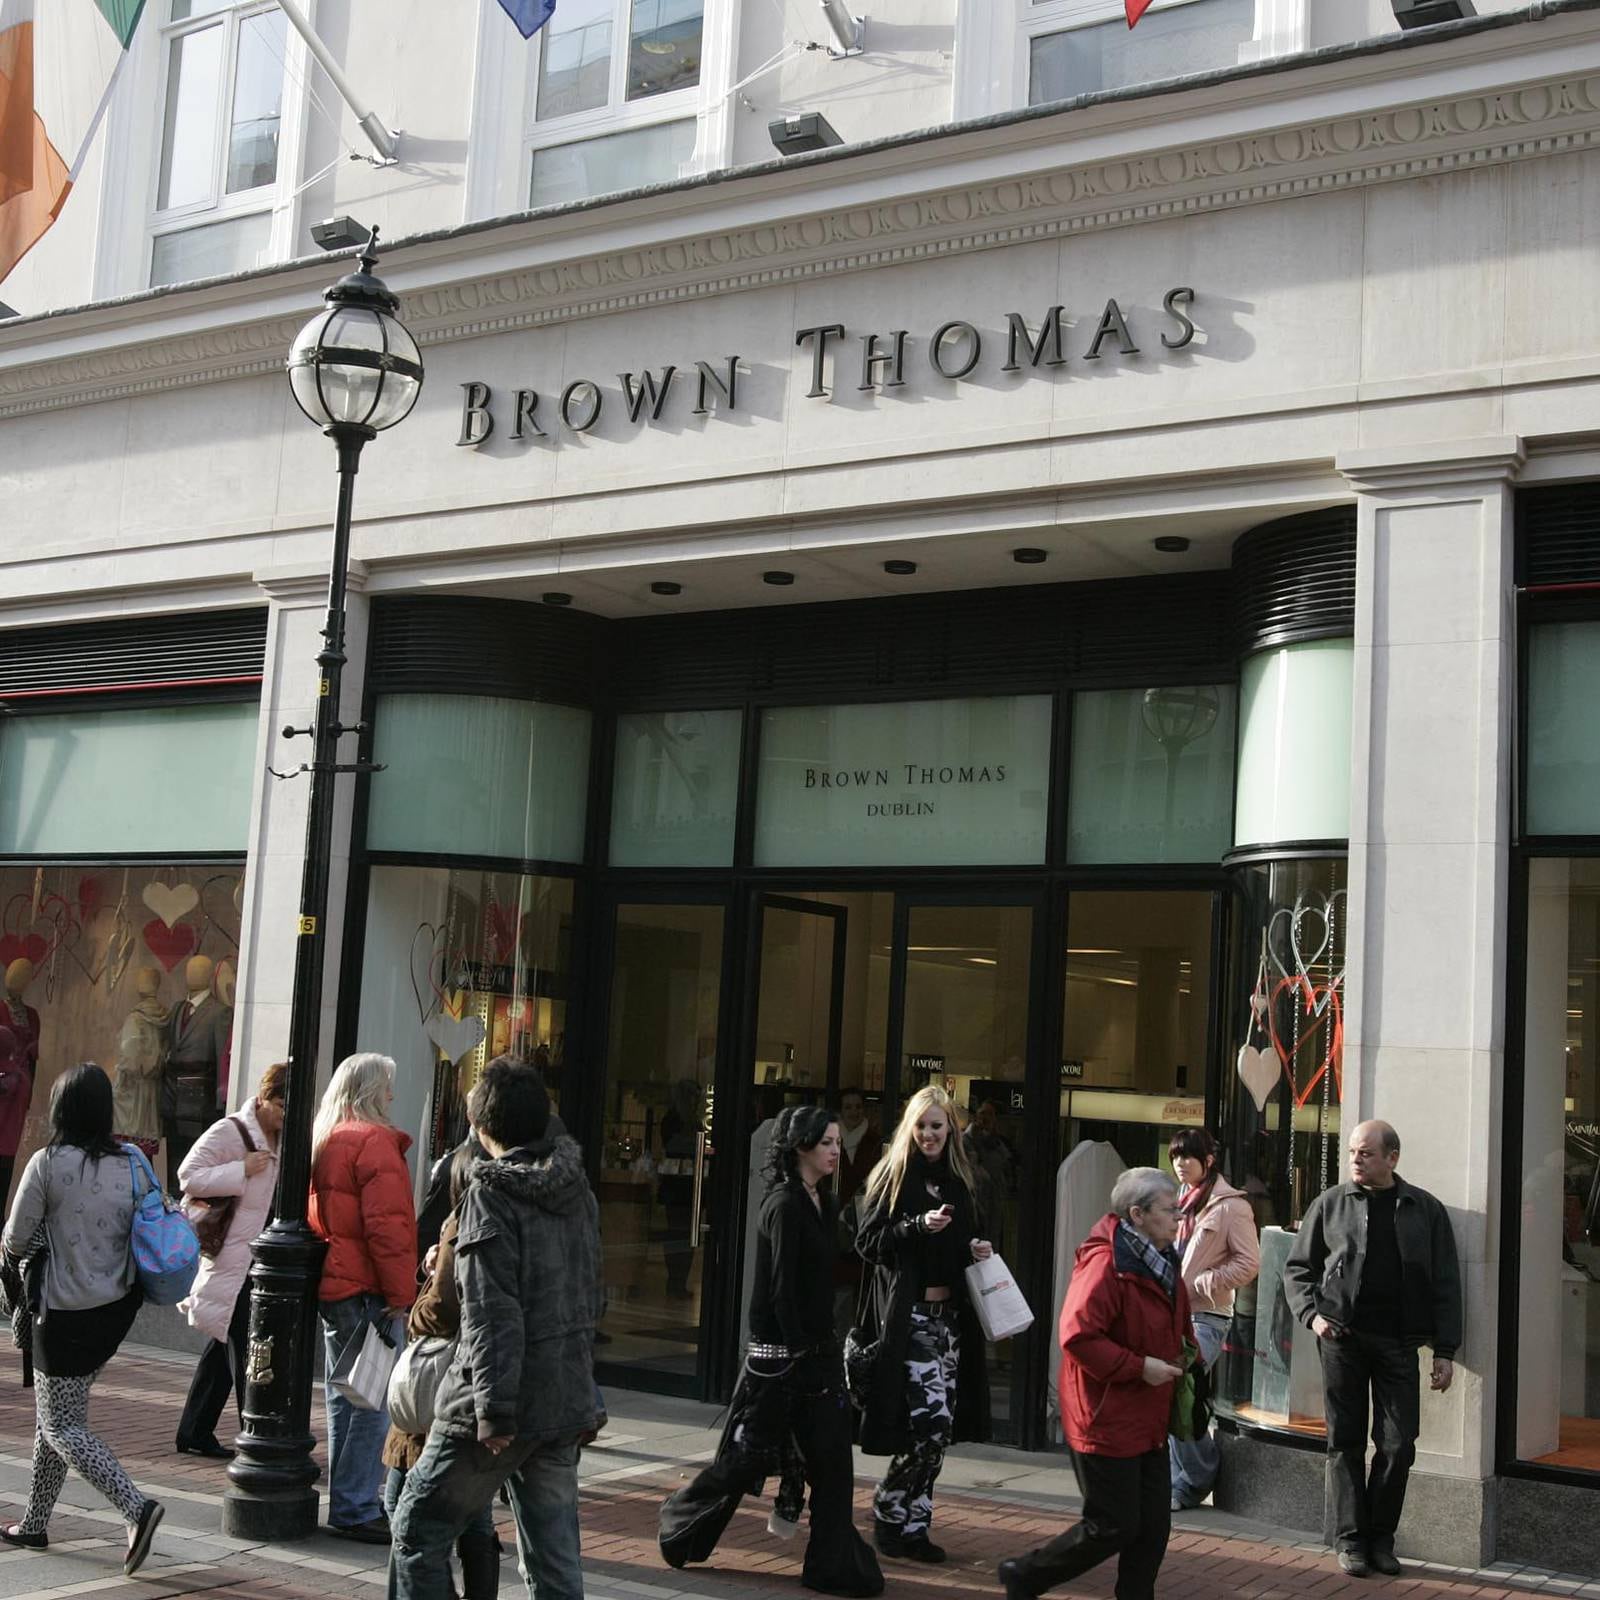 Brown Thomas and Arnotts coup is a 'dream come true' for Olivia's Haven